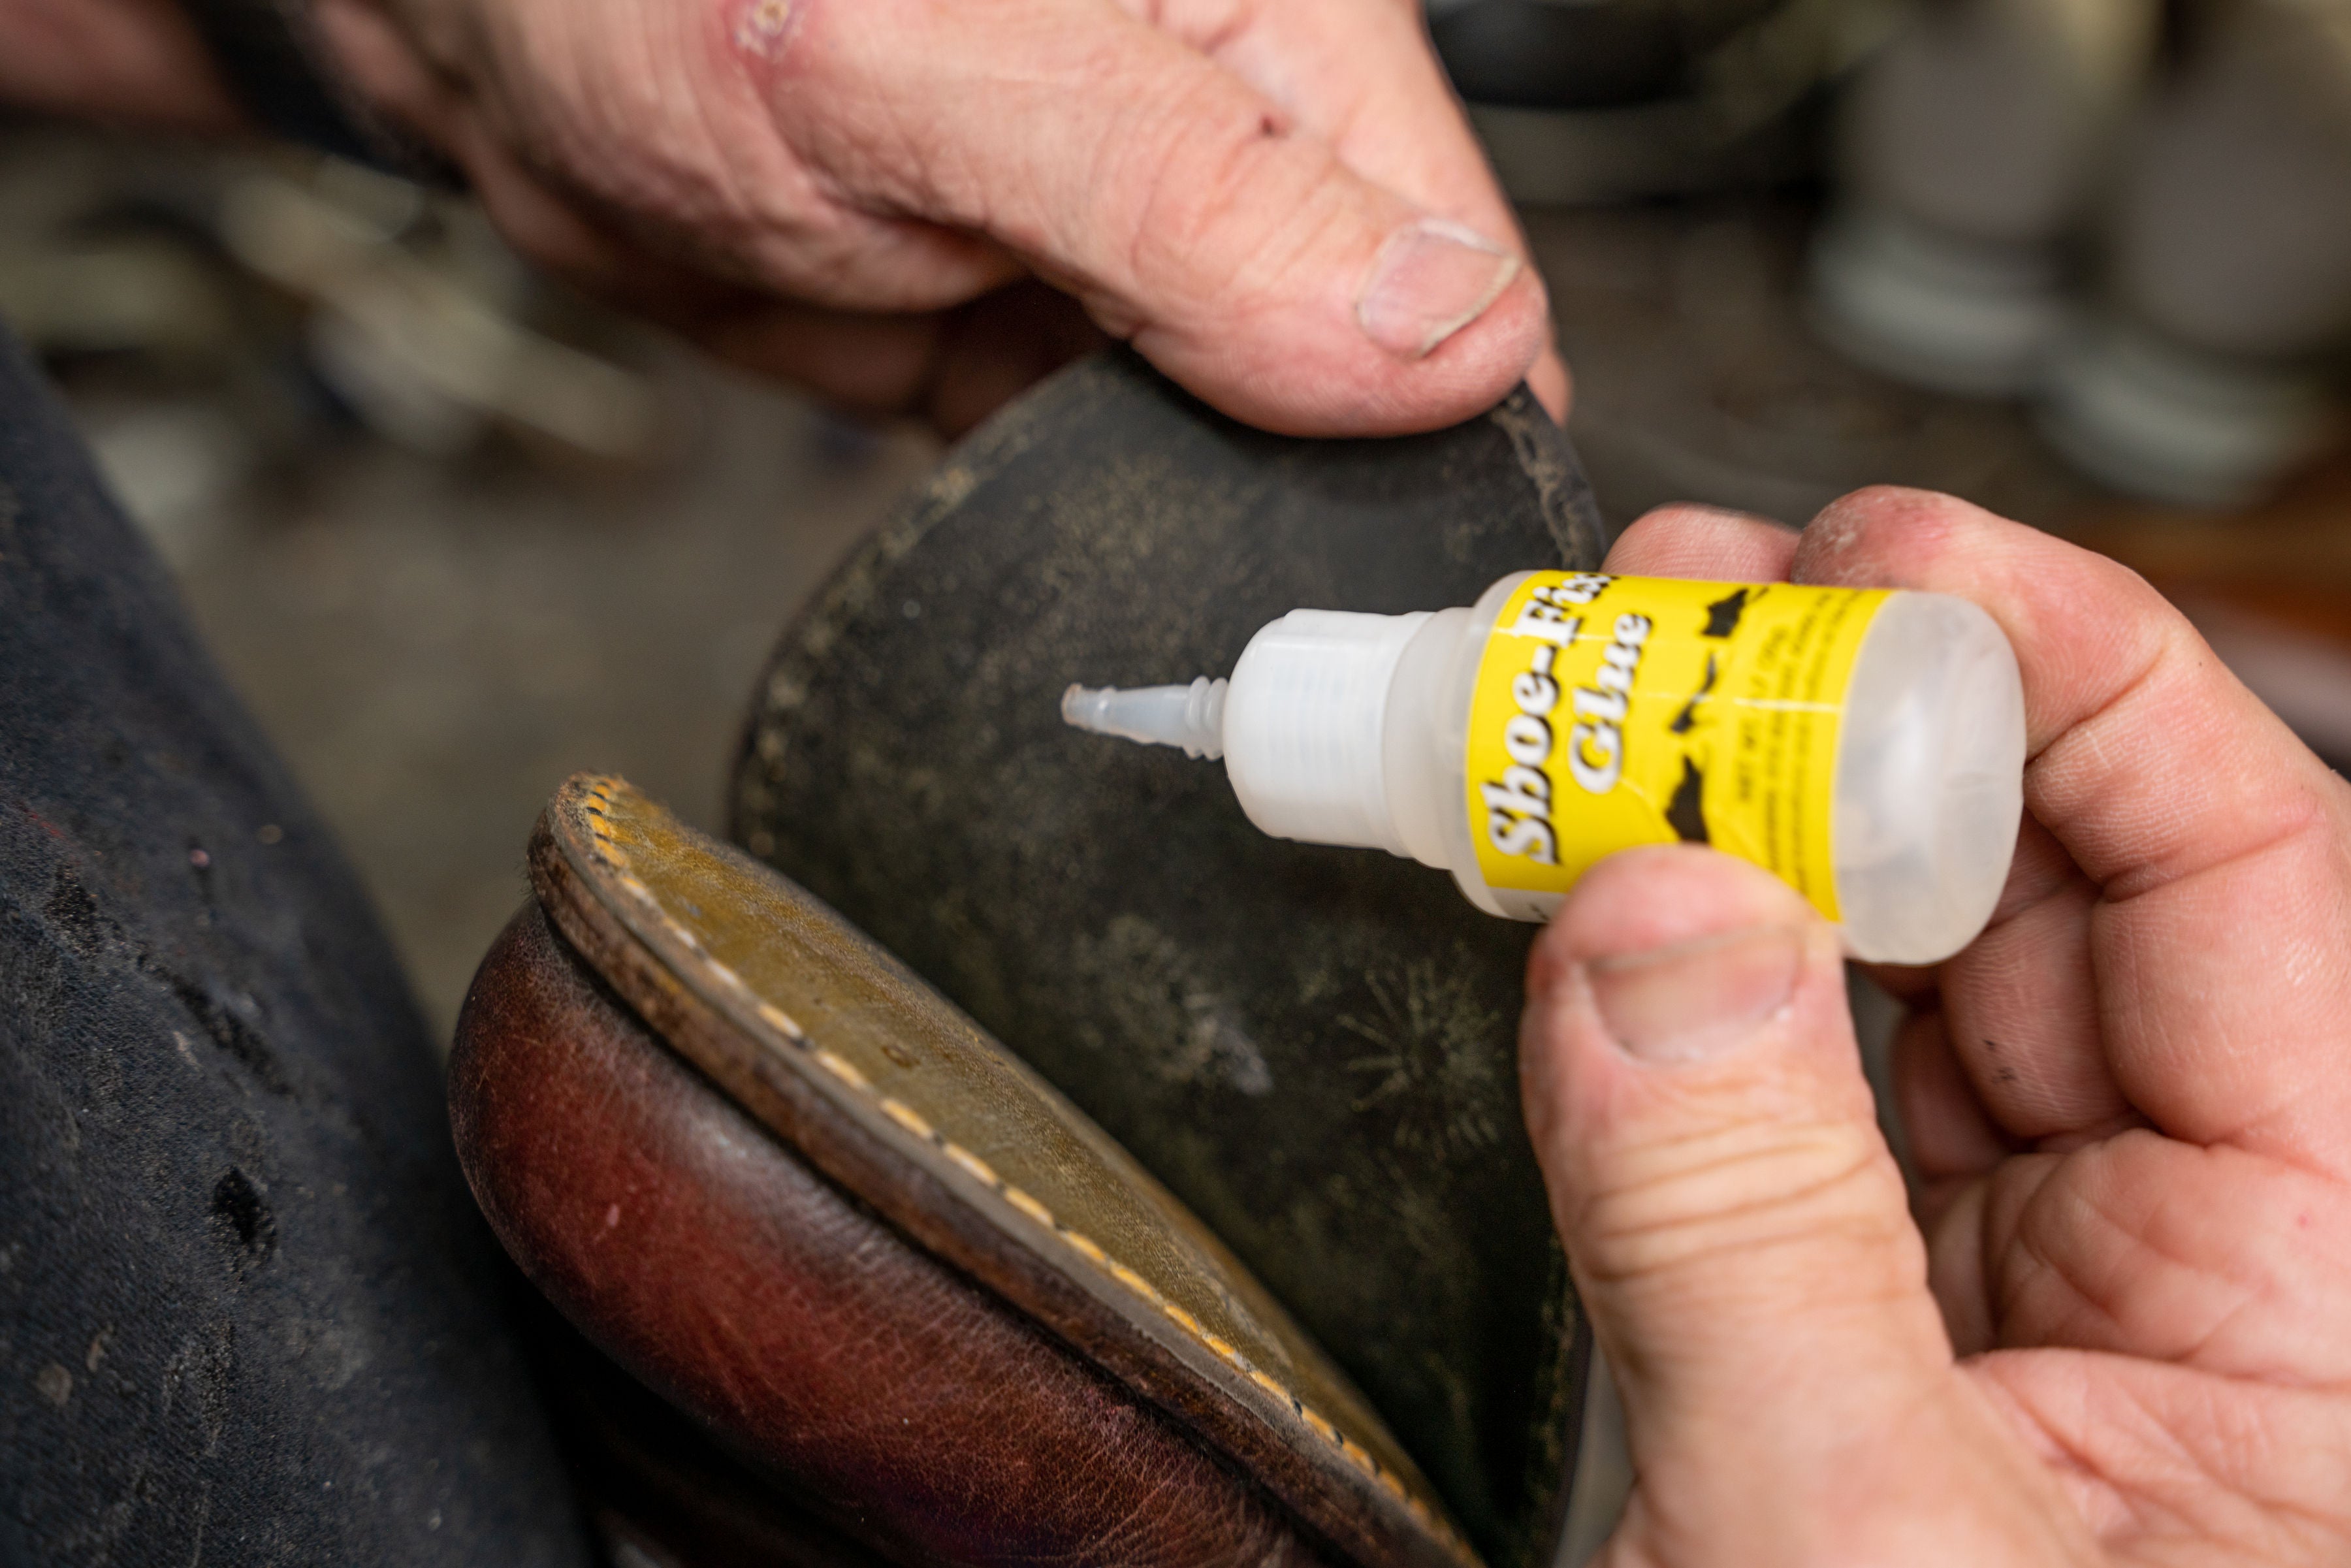 Boot-Fix Glue Professional Grade - Easy to Use Glue, Flexible Bond Boots  Fix Glue & No Clamping Needed Adhesive, 20g 